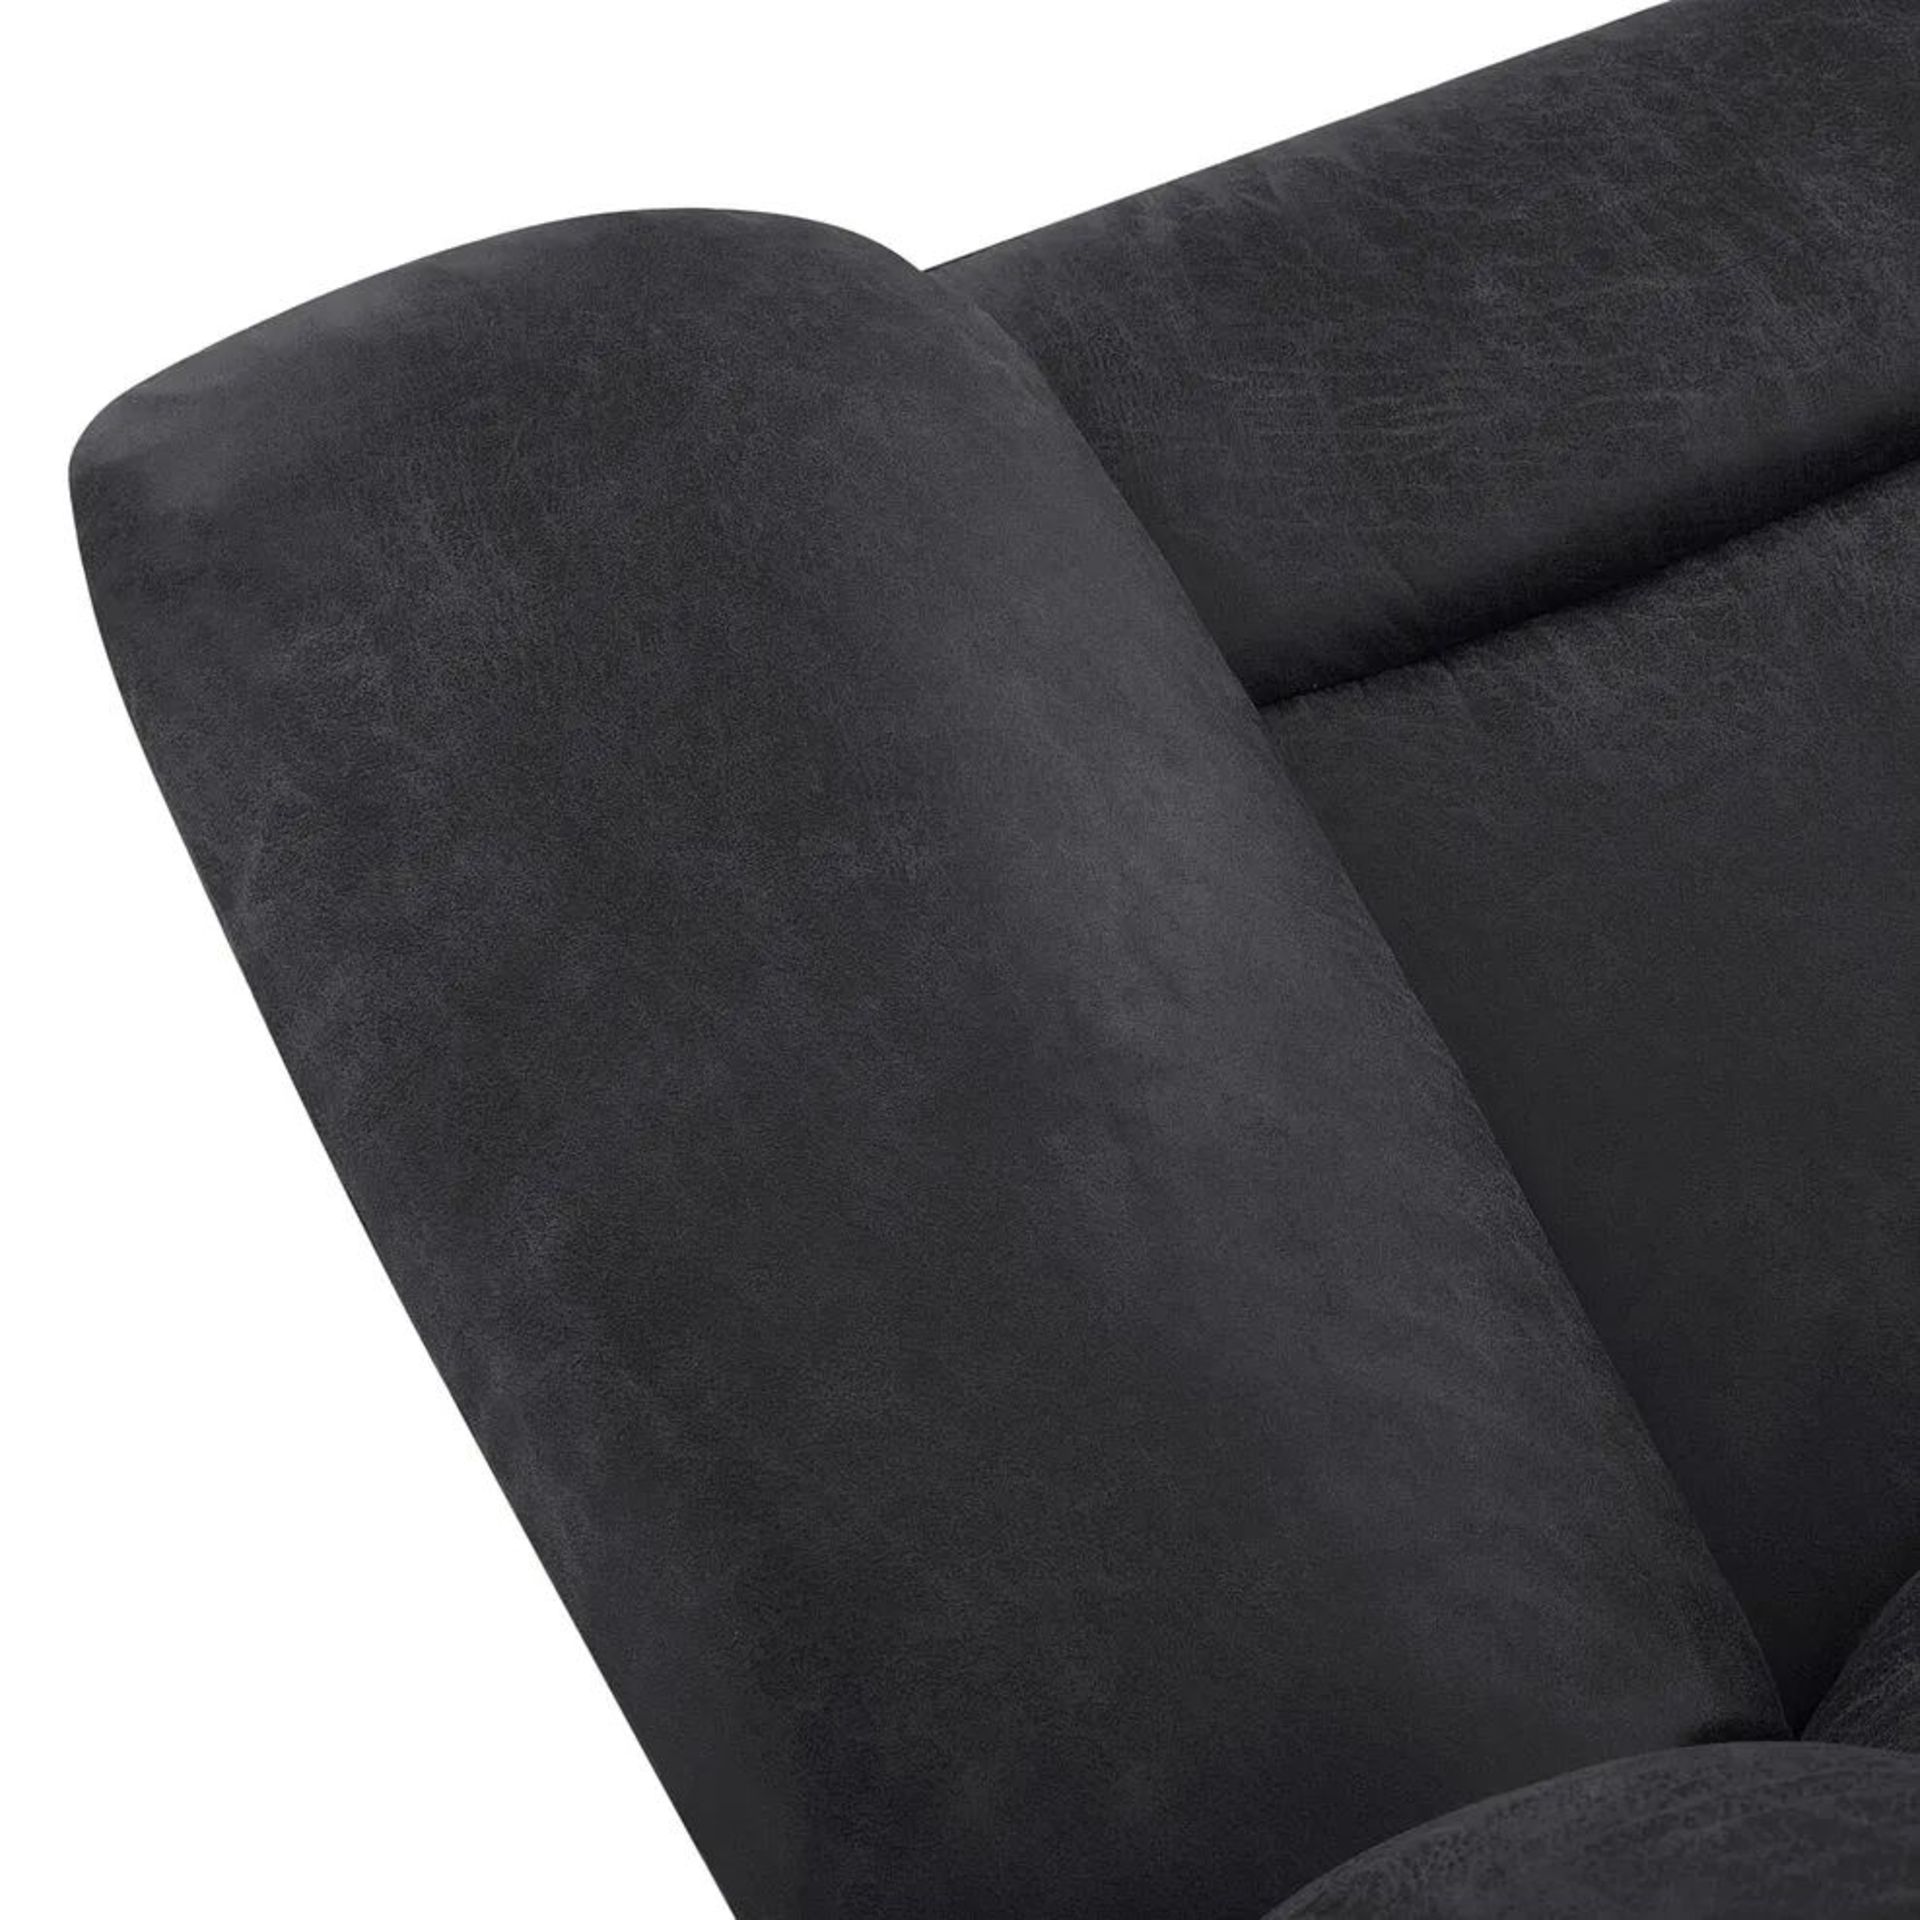 BRAND NEW MARLOW 2 Seater Electric Recliner Sofa - MILLER GREY FABRIC. RRP £1049. Designed to suit - Image 11 of 12